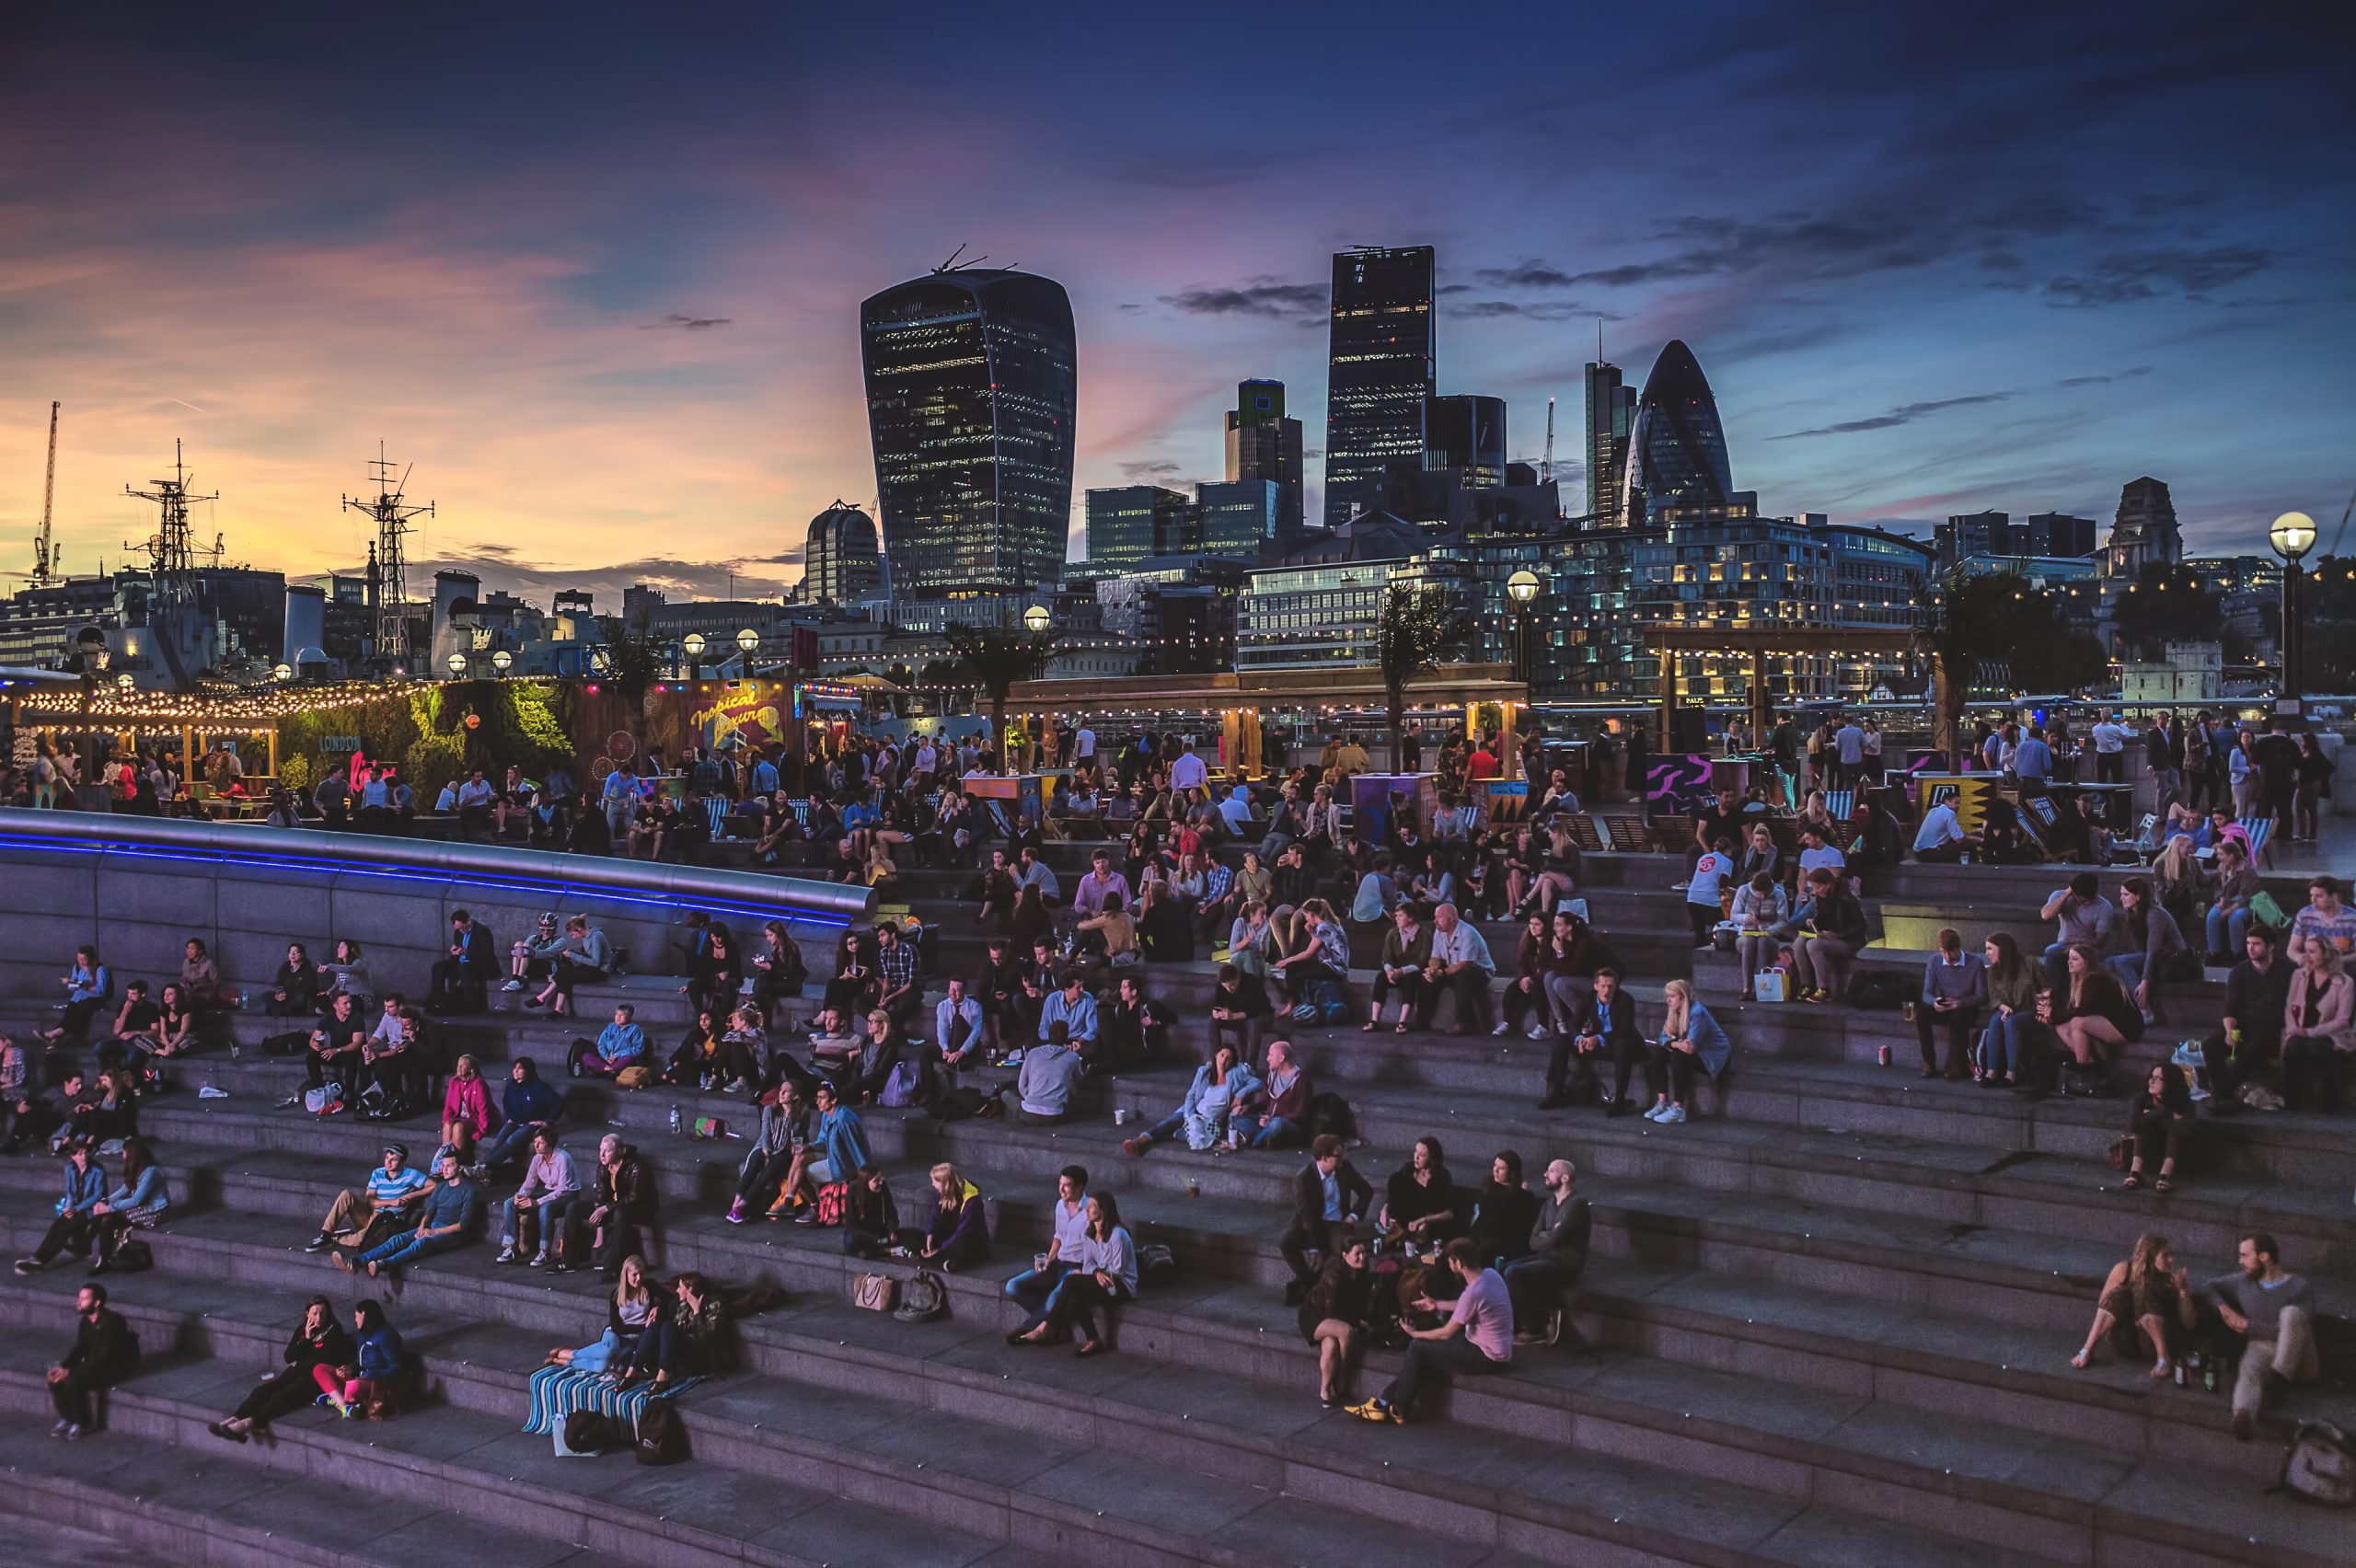 Vibrant nighttime shot of a gathering at The Scoop, captured by Wright Content. People gather for a music event, illuminated by colorful lights, with the London cityscape in the background.